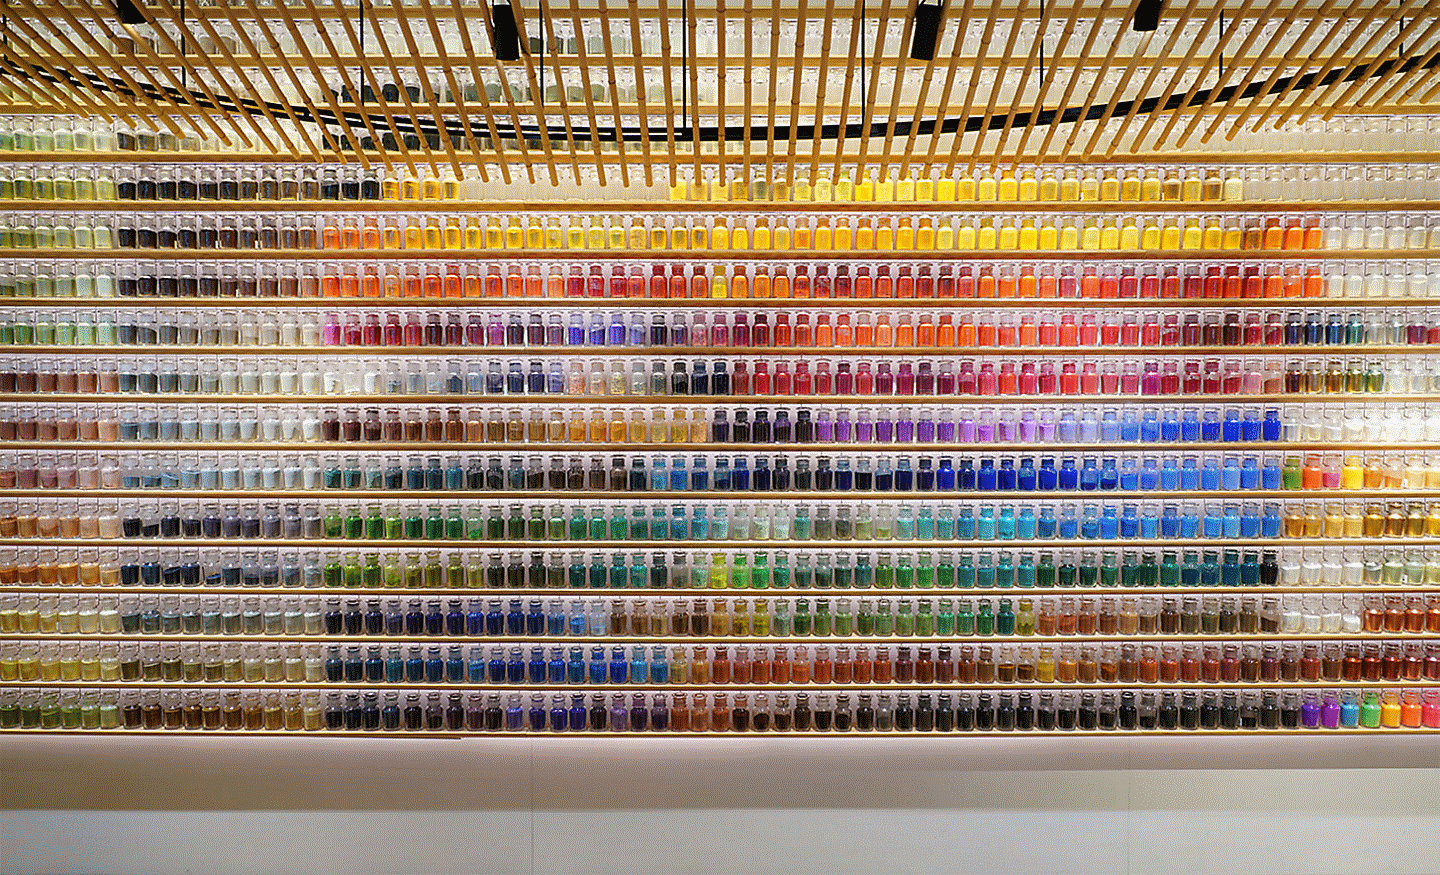 Example image of a wall full of colourful bottles